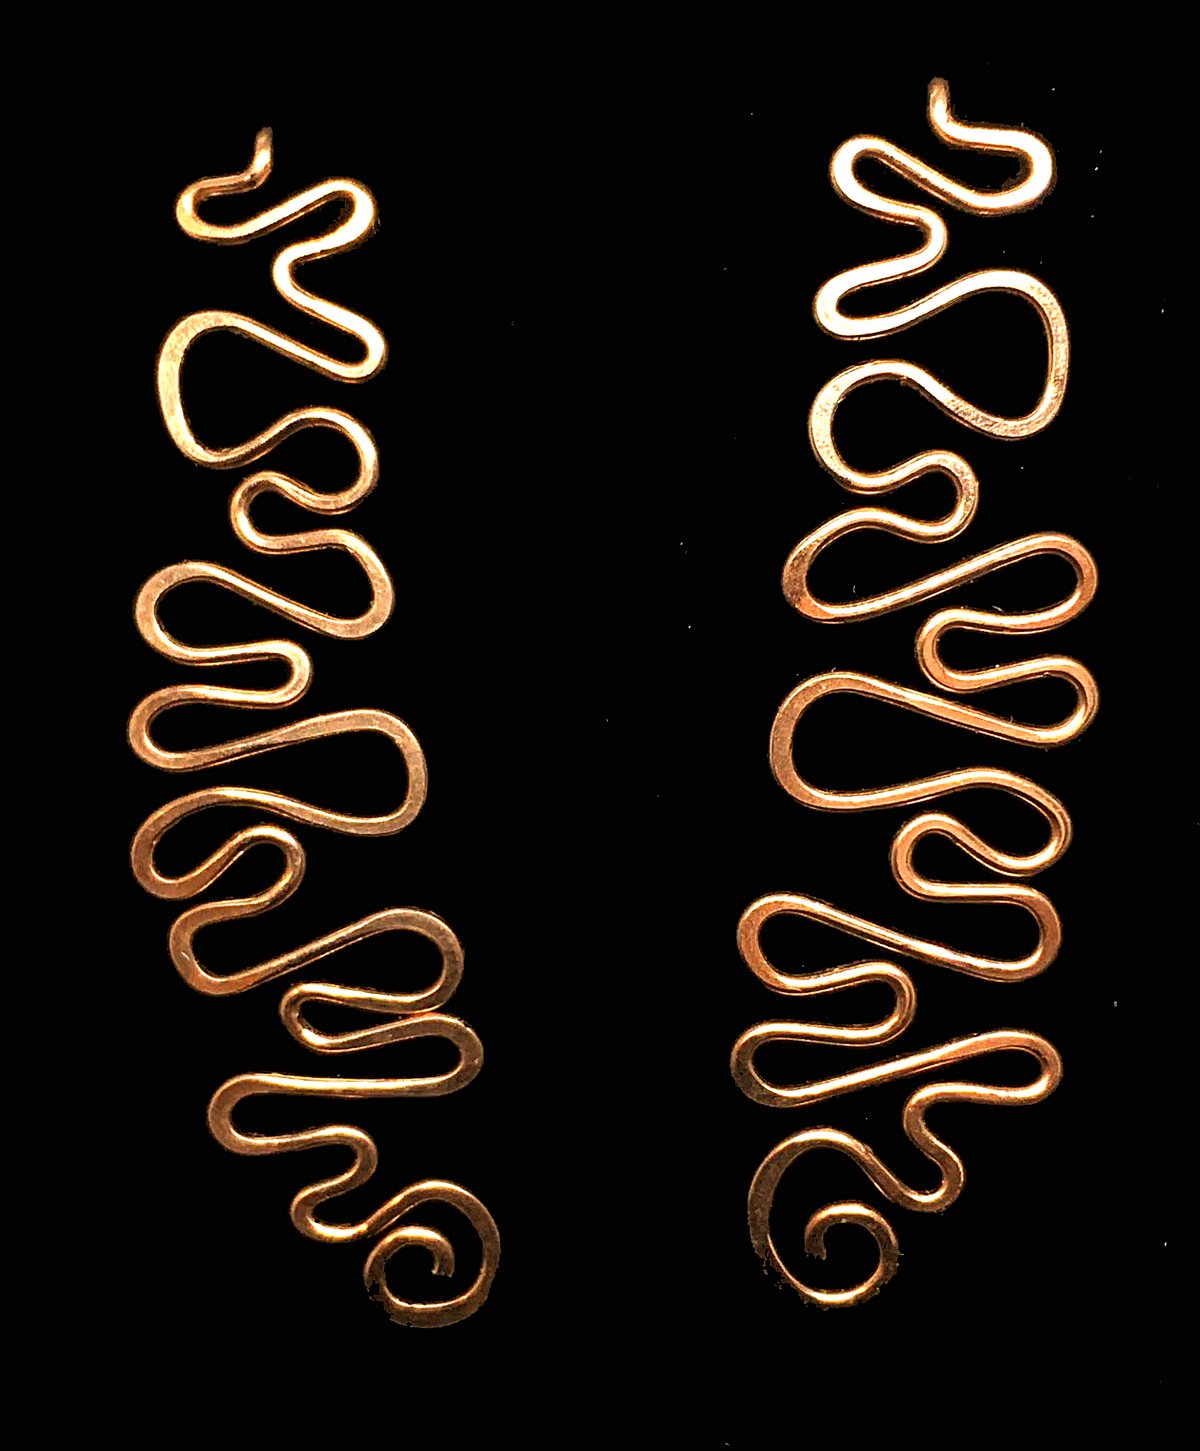 Image of Squiggle Earrings in Yellow Gold-Filled